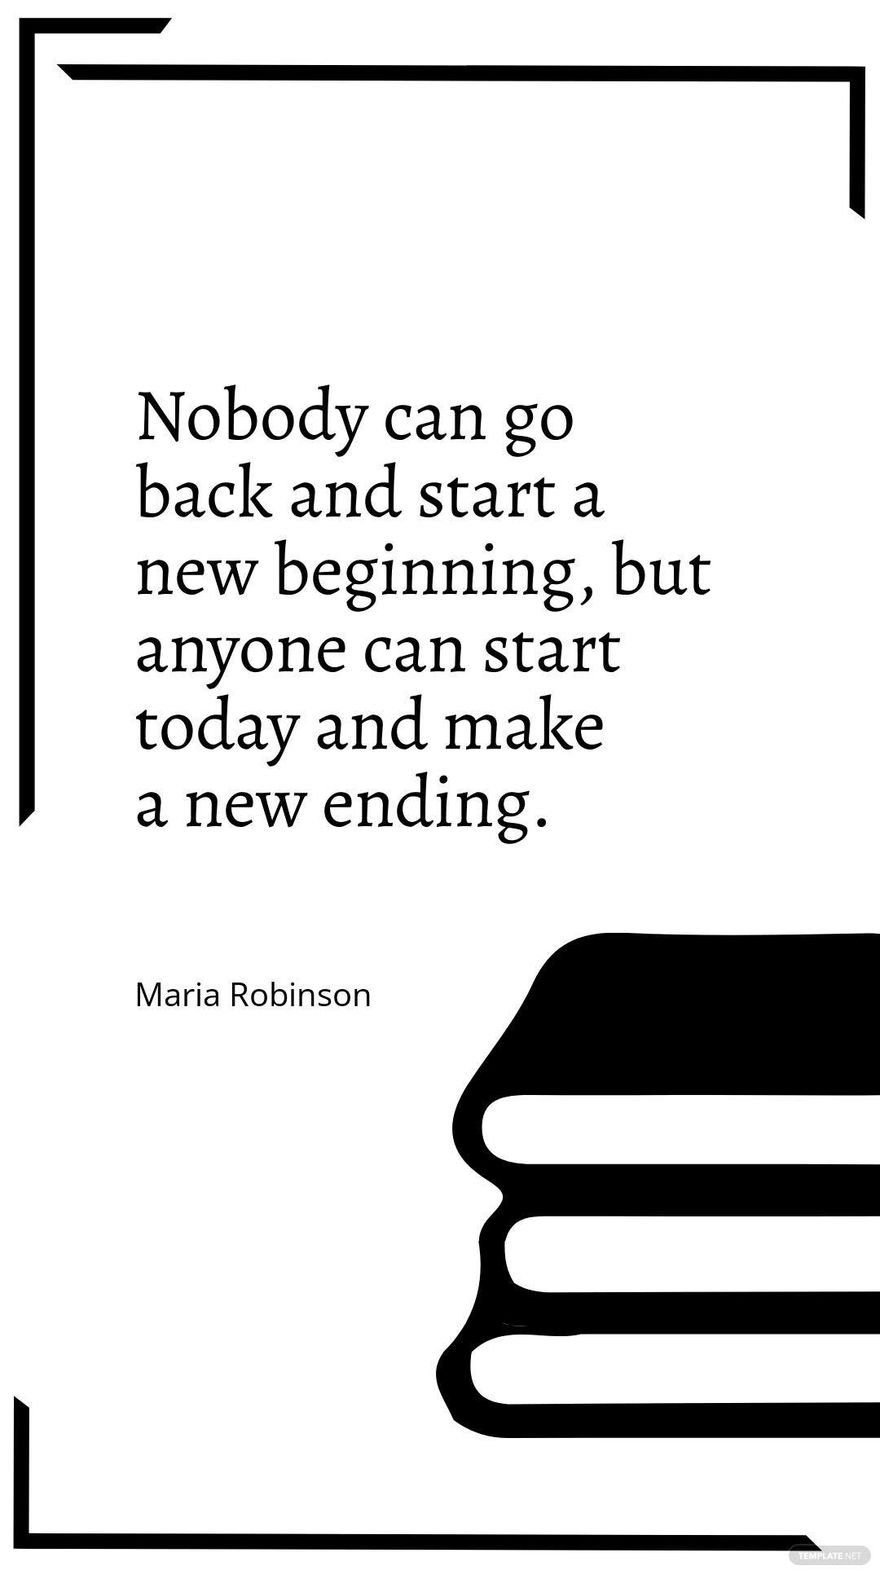 Maria Robinson - Nobody can go back and start a new beginning, but anyone can start today and make a new ending.